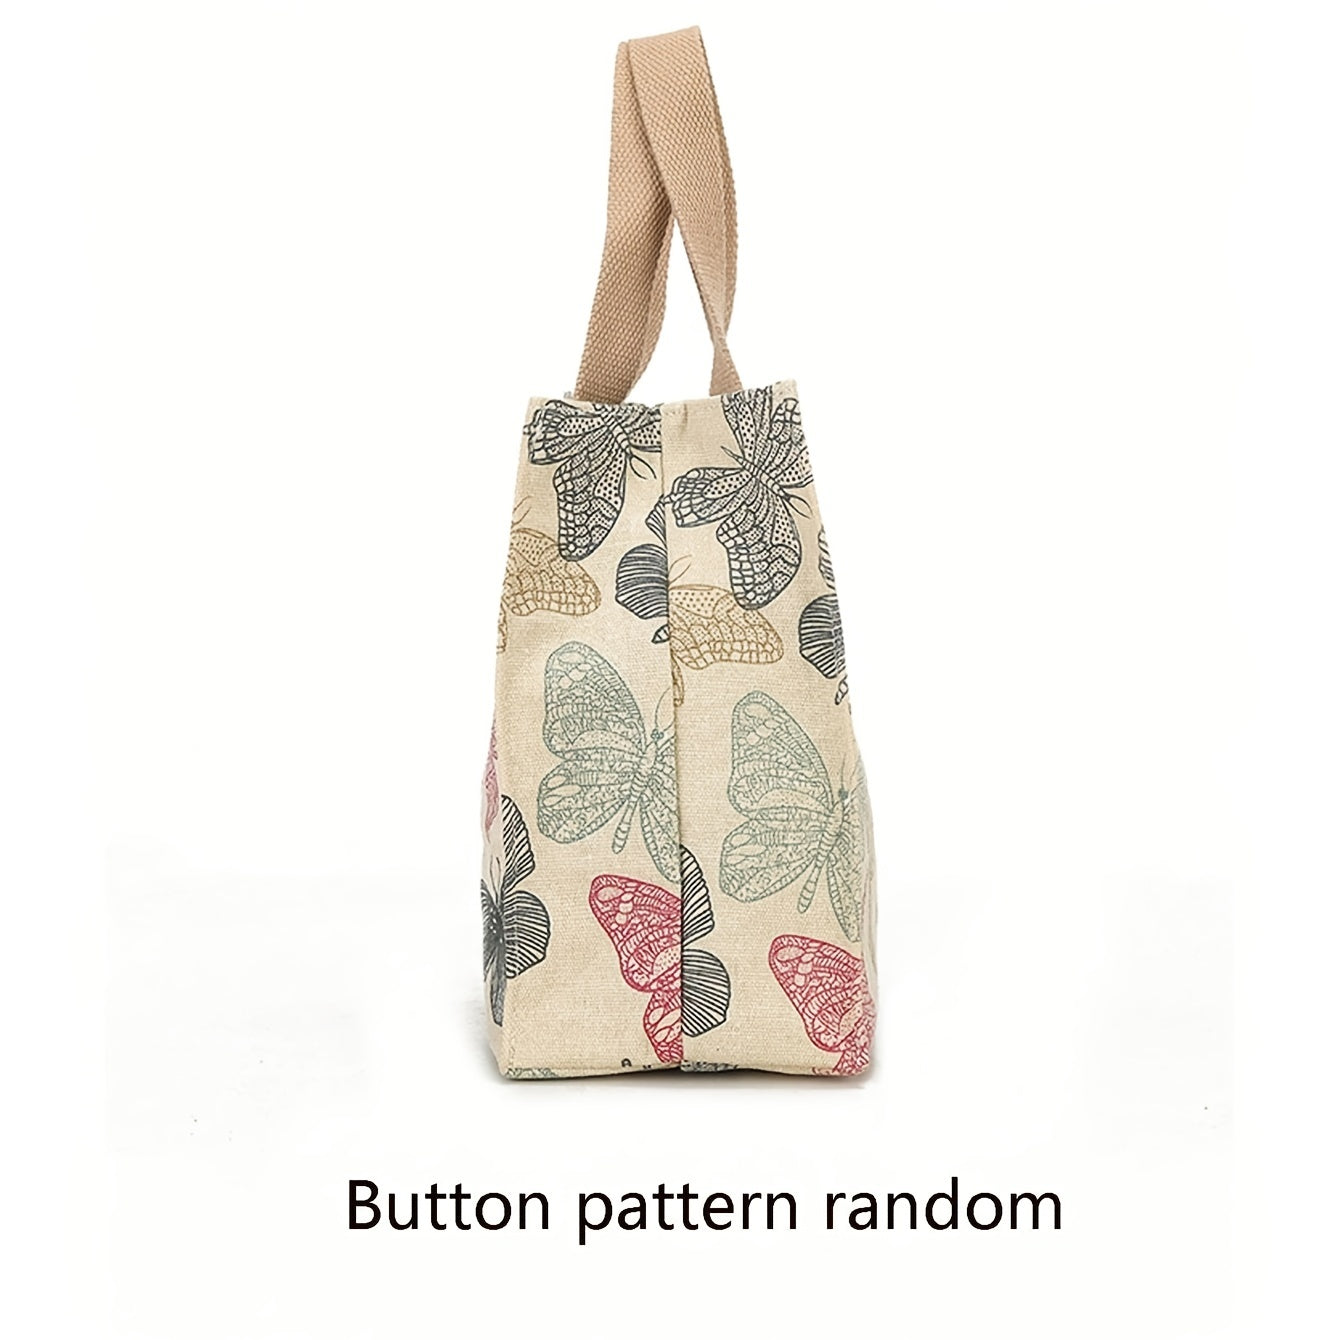 Aesthetic Butterfly Print Tote Bag, Portable Lunch Bento Bag, Perfect For School, Travel, Picnic, Office